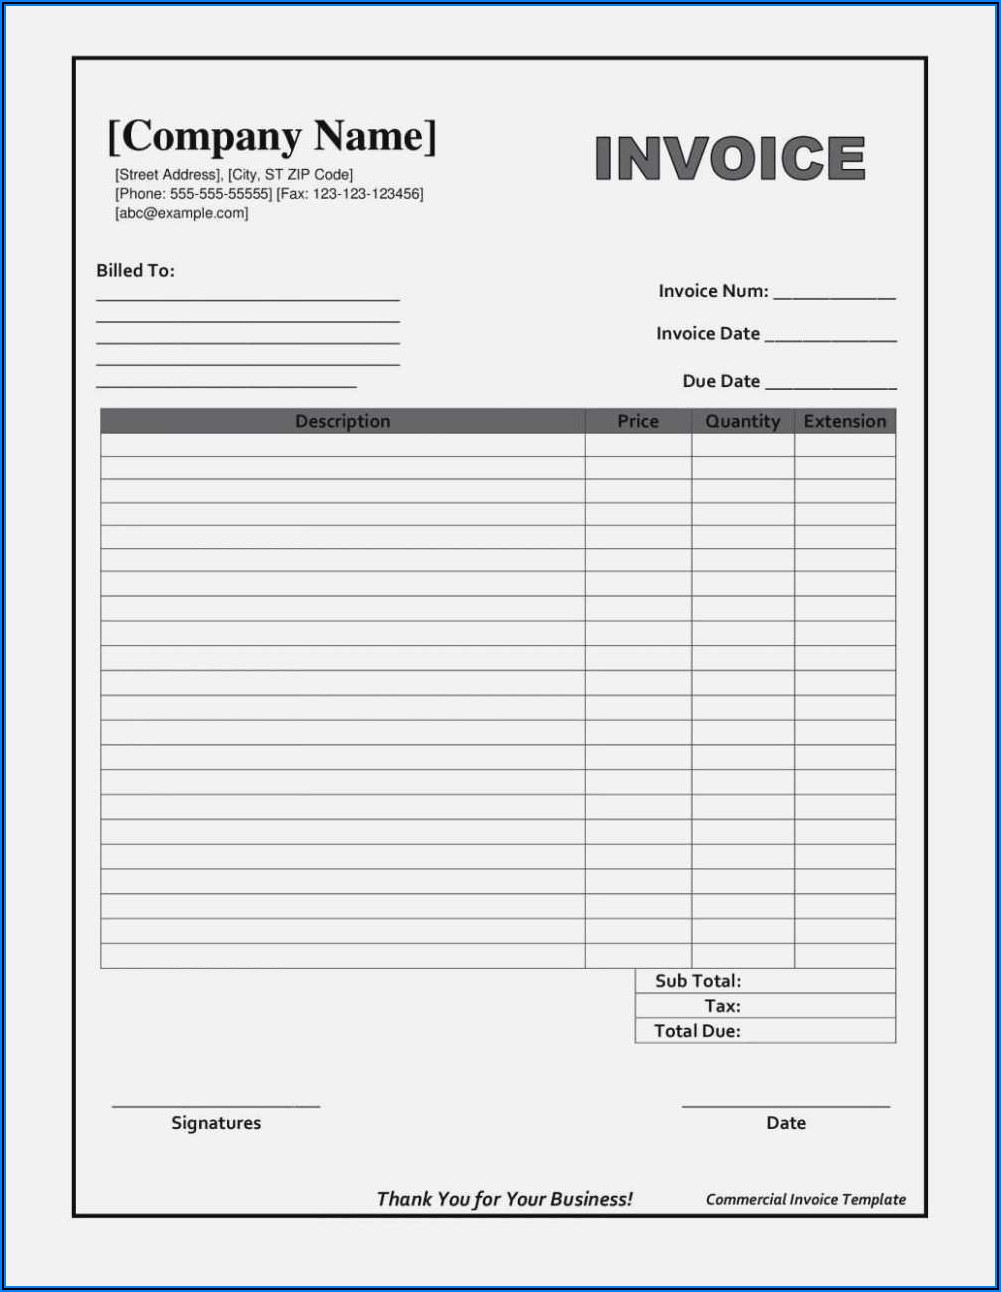 Copy Quickbooks Invoice Template Another Company